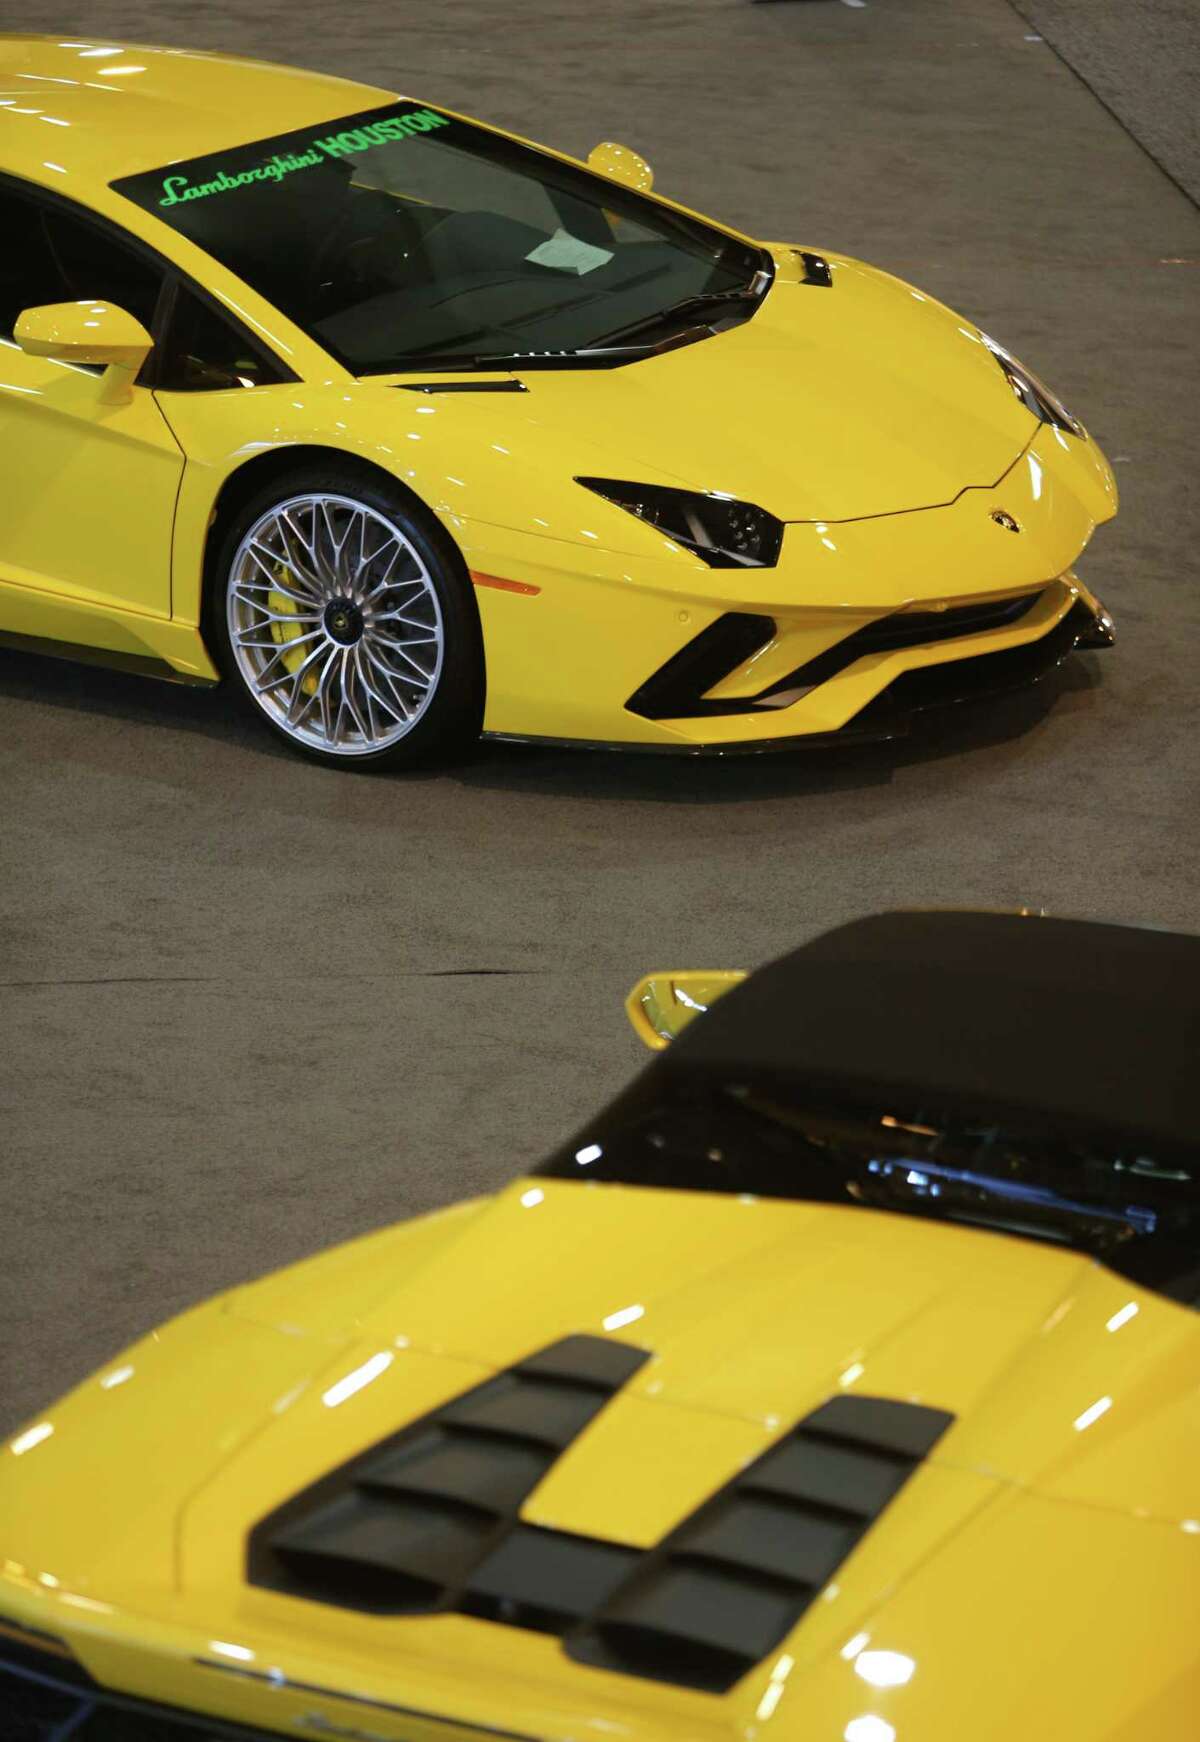 Two Lamborghinis are in place during the final day of setup for the Houston Auto Show at NRG Center, Tuesday, April 4, 2017, in Houston. (Mark Mulligan / Houston Chronicle)